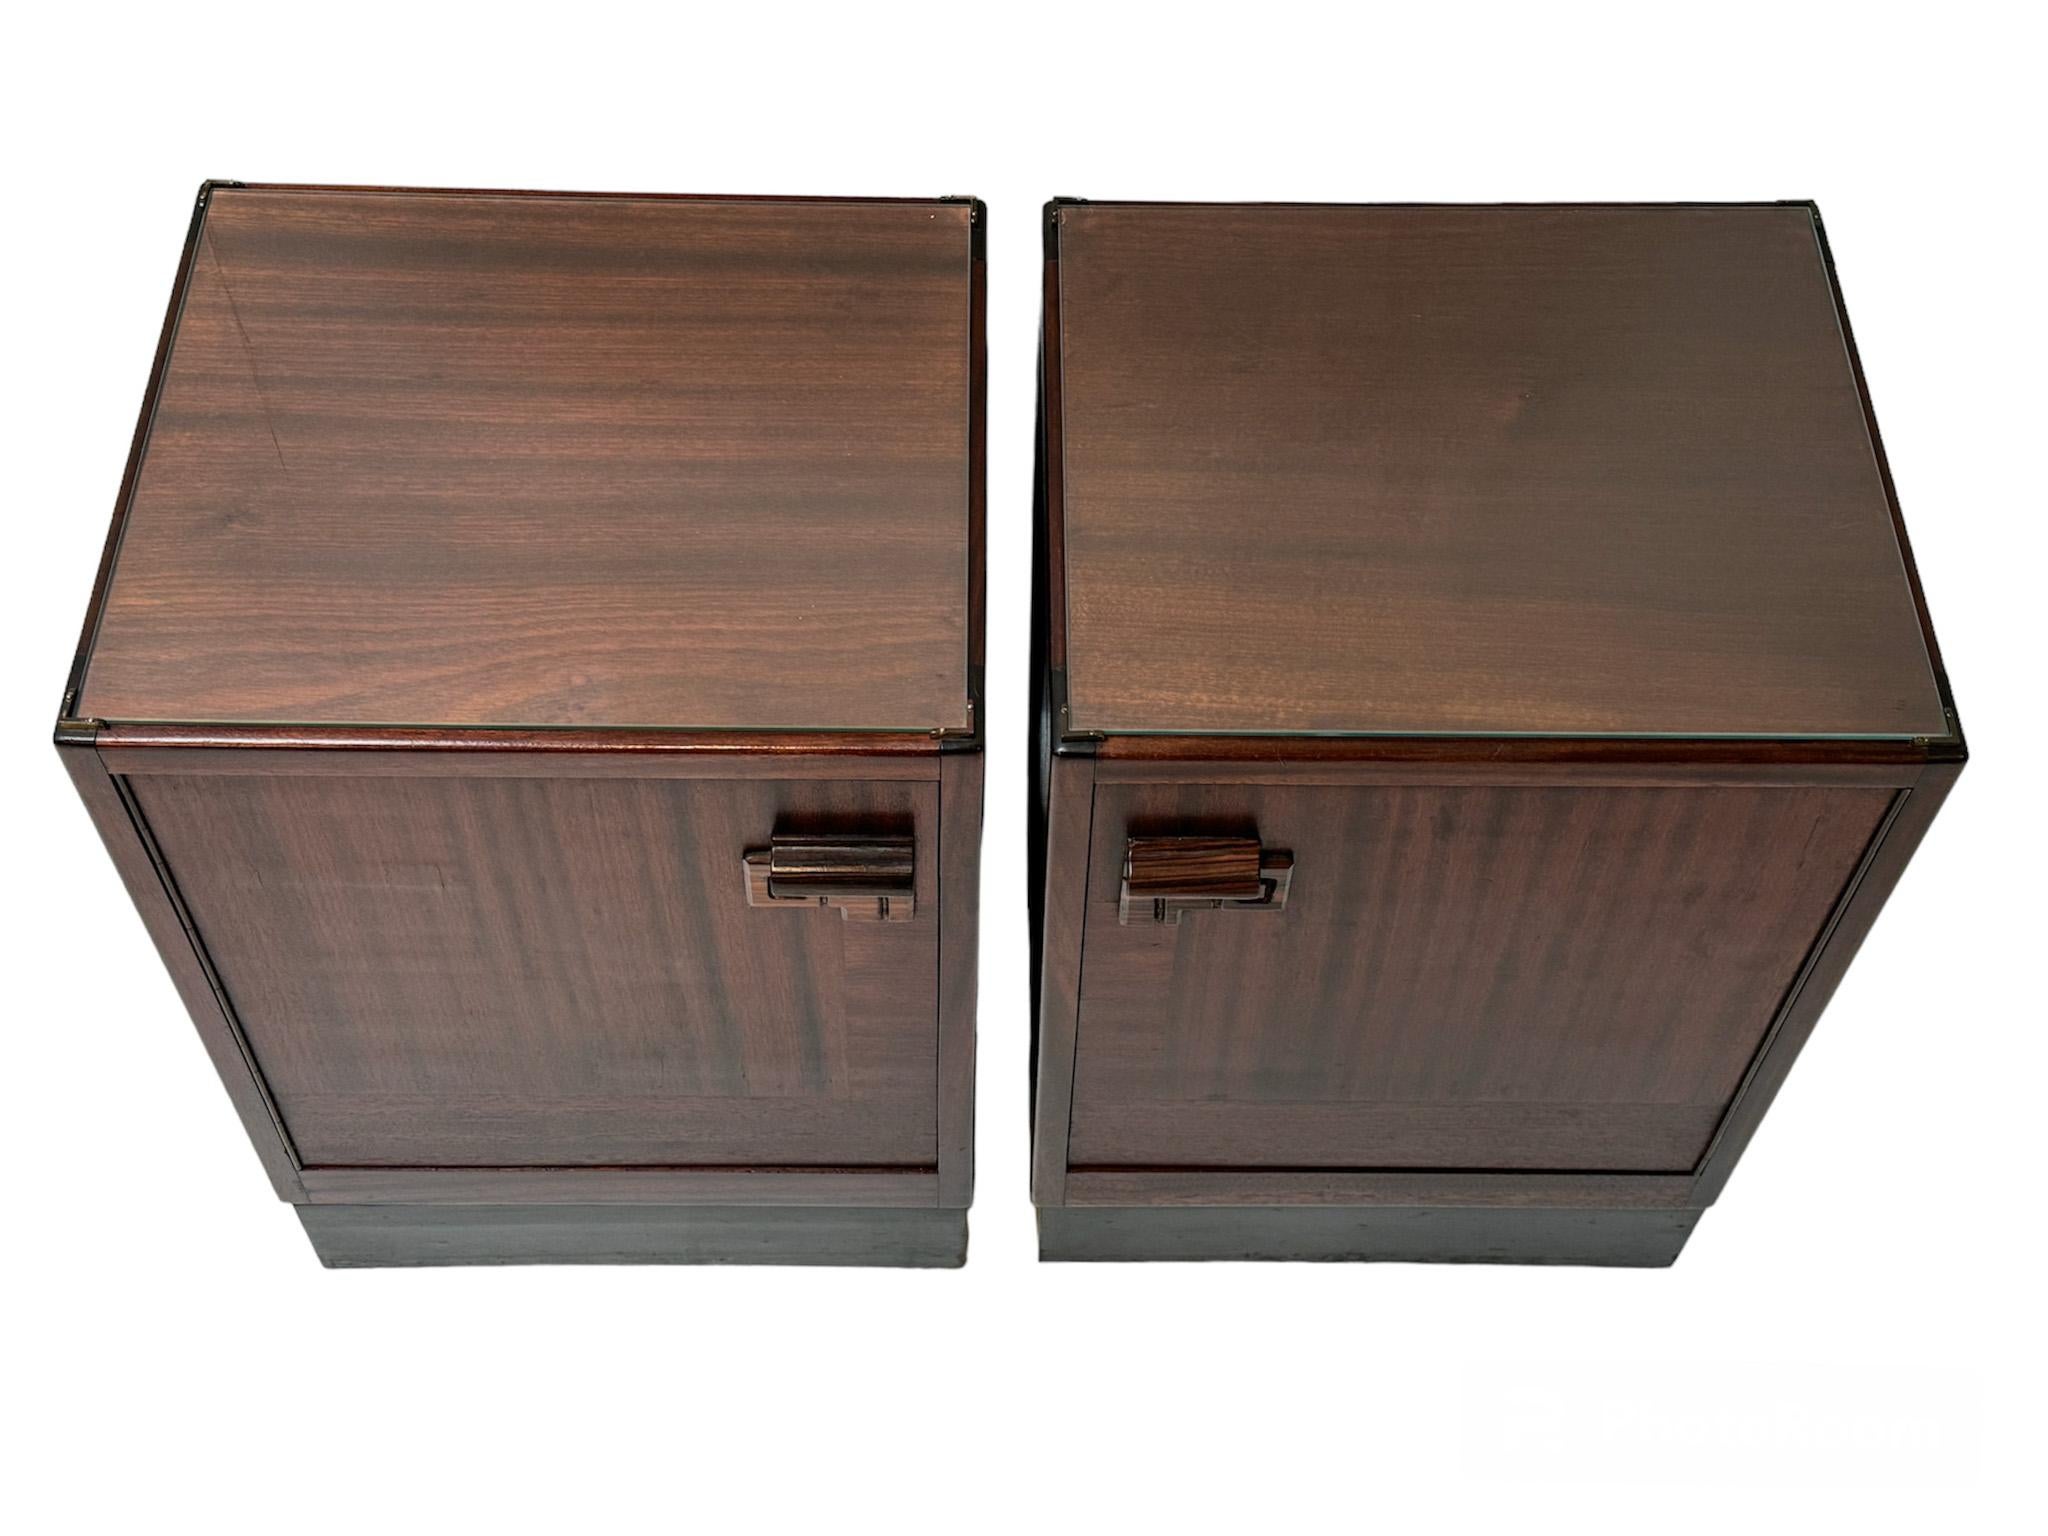 Stunning and rare pair of Art Deco Amsterdamse School nightstands or bedside tables.
Striking Dutch design from the 1920s.
Solid walnut bases with original solid macassar handles on the doors.
This wonderful pair of Art Deco Amsterdamse School